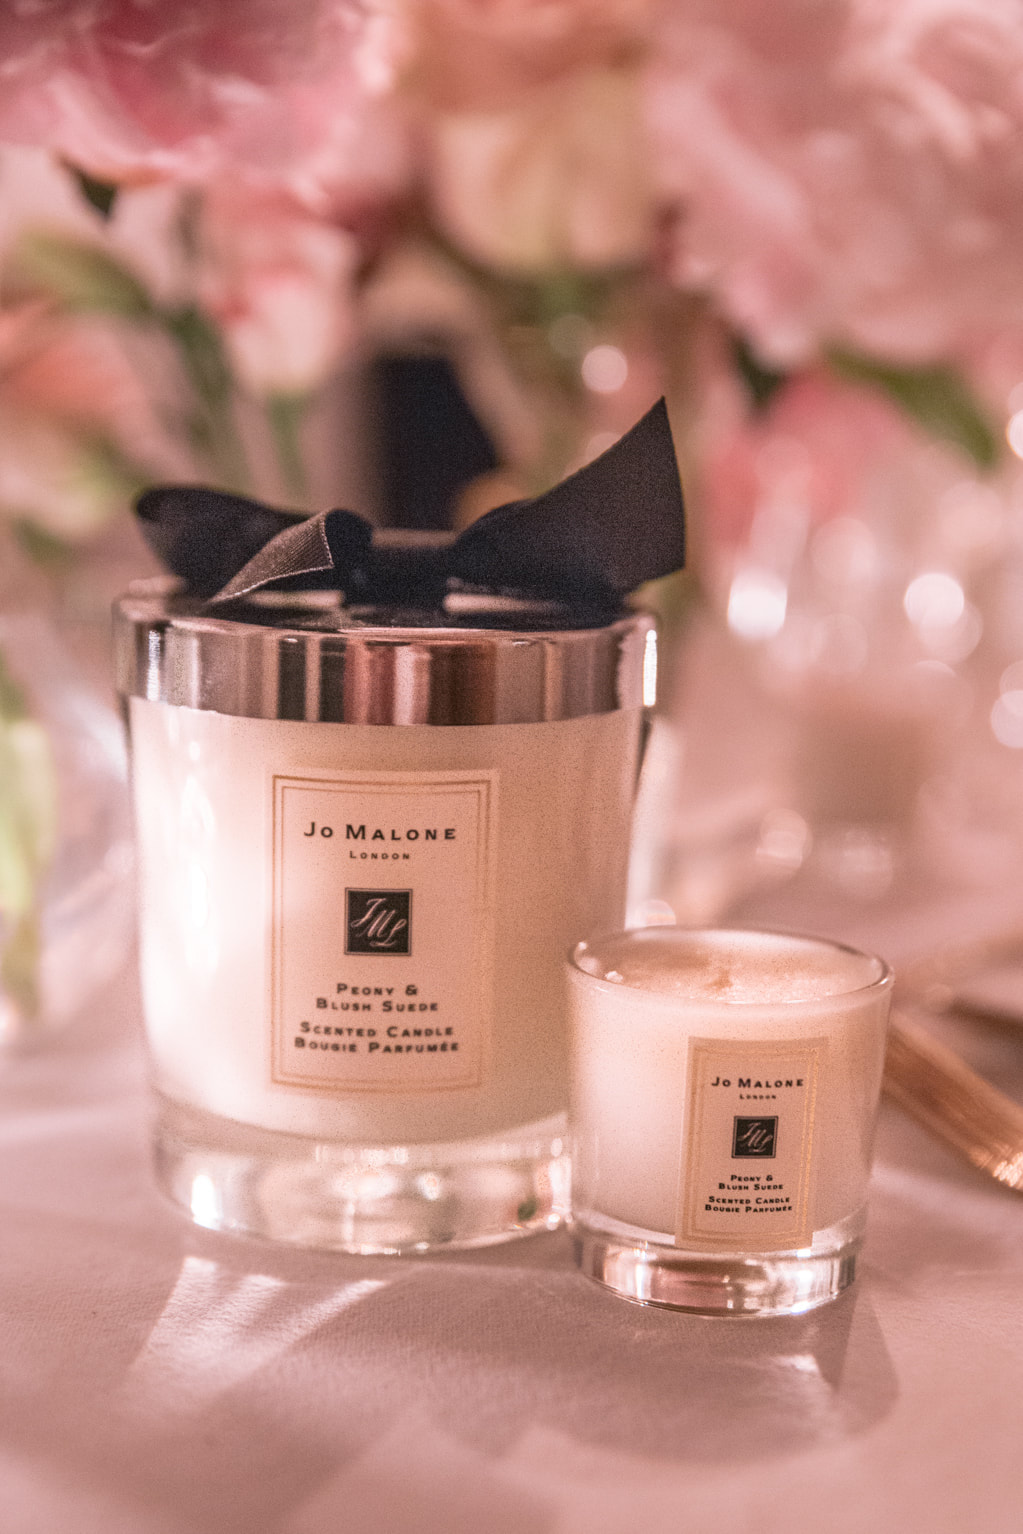 Jo Malone Christmas giveaway by The Belle Blog